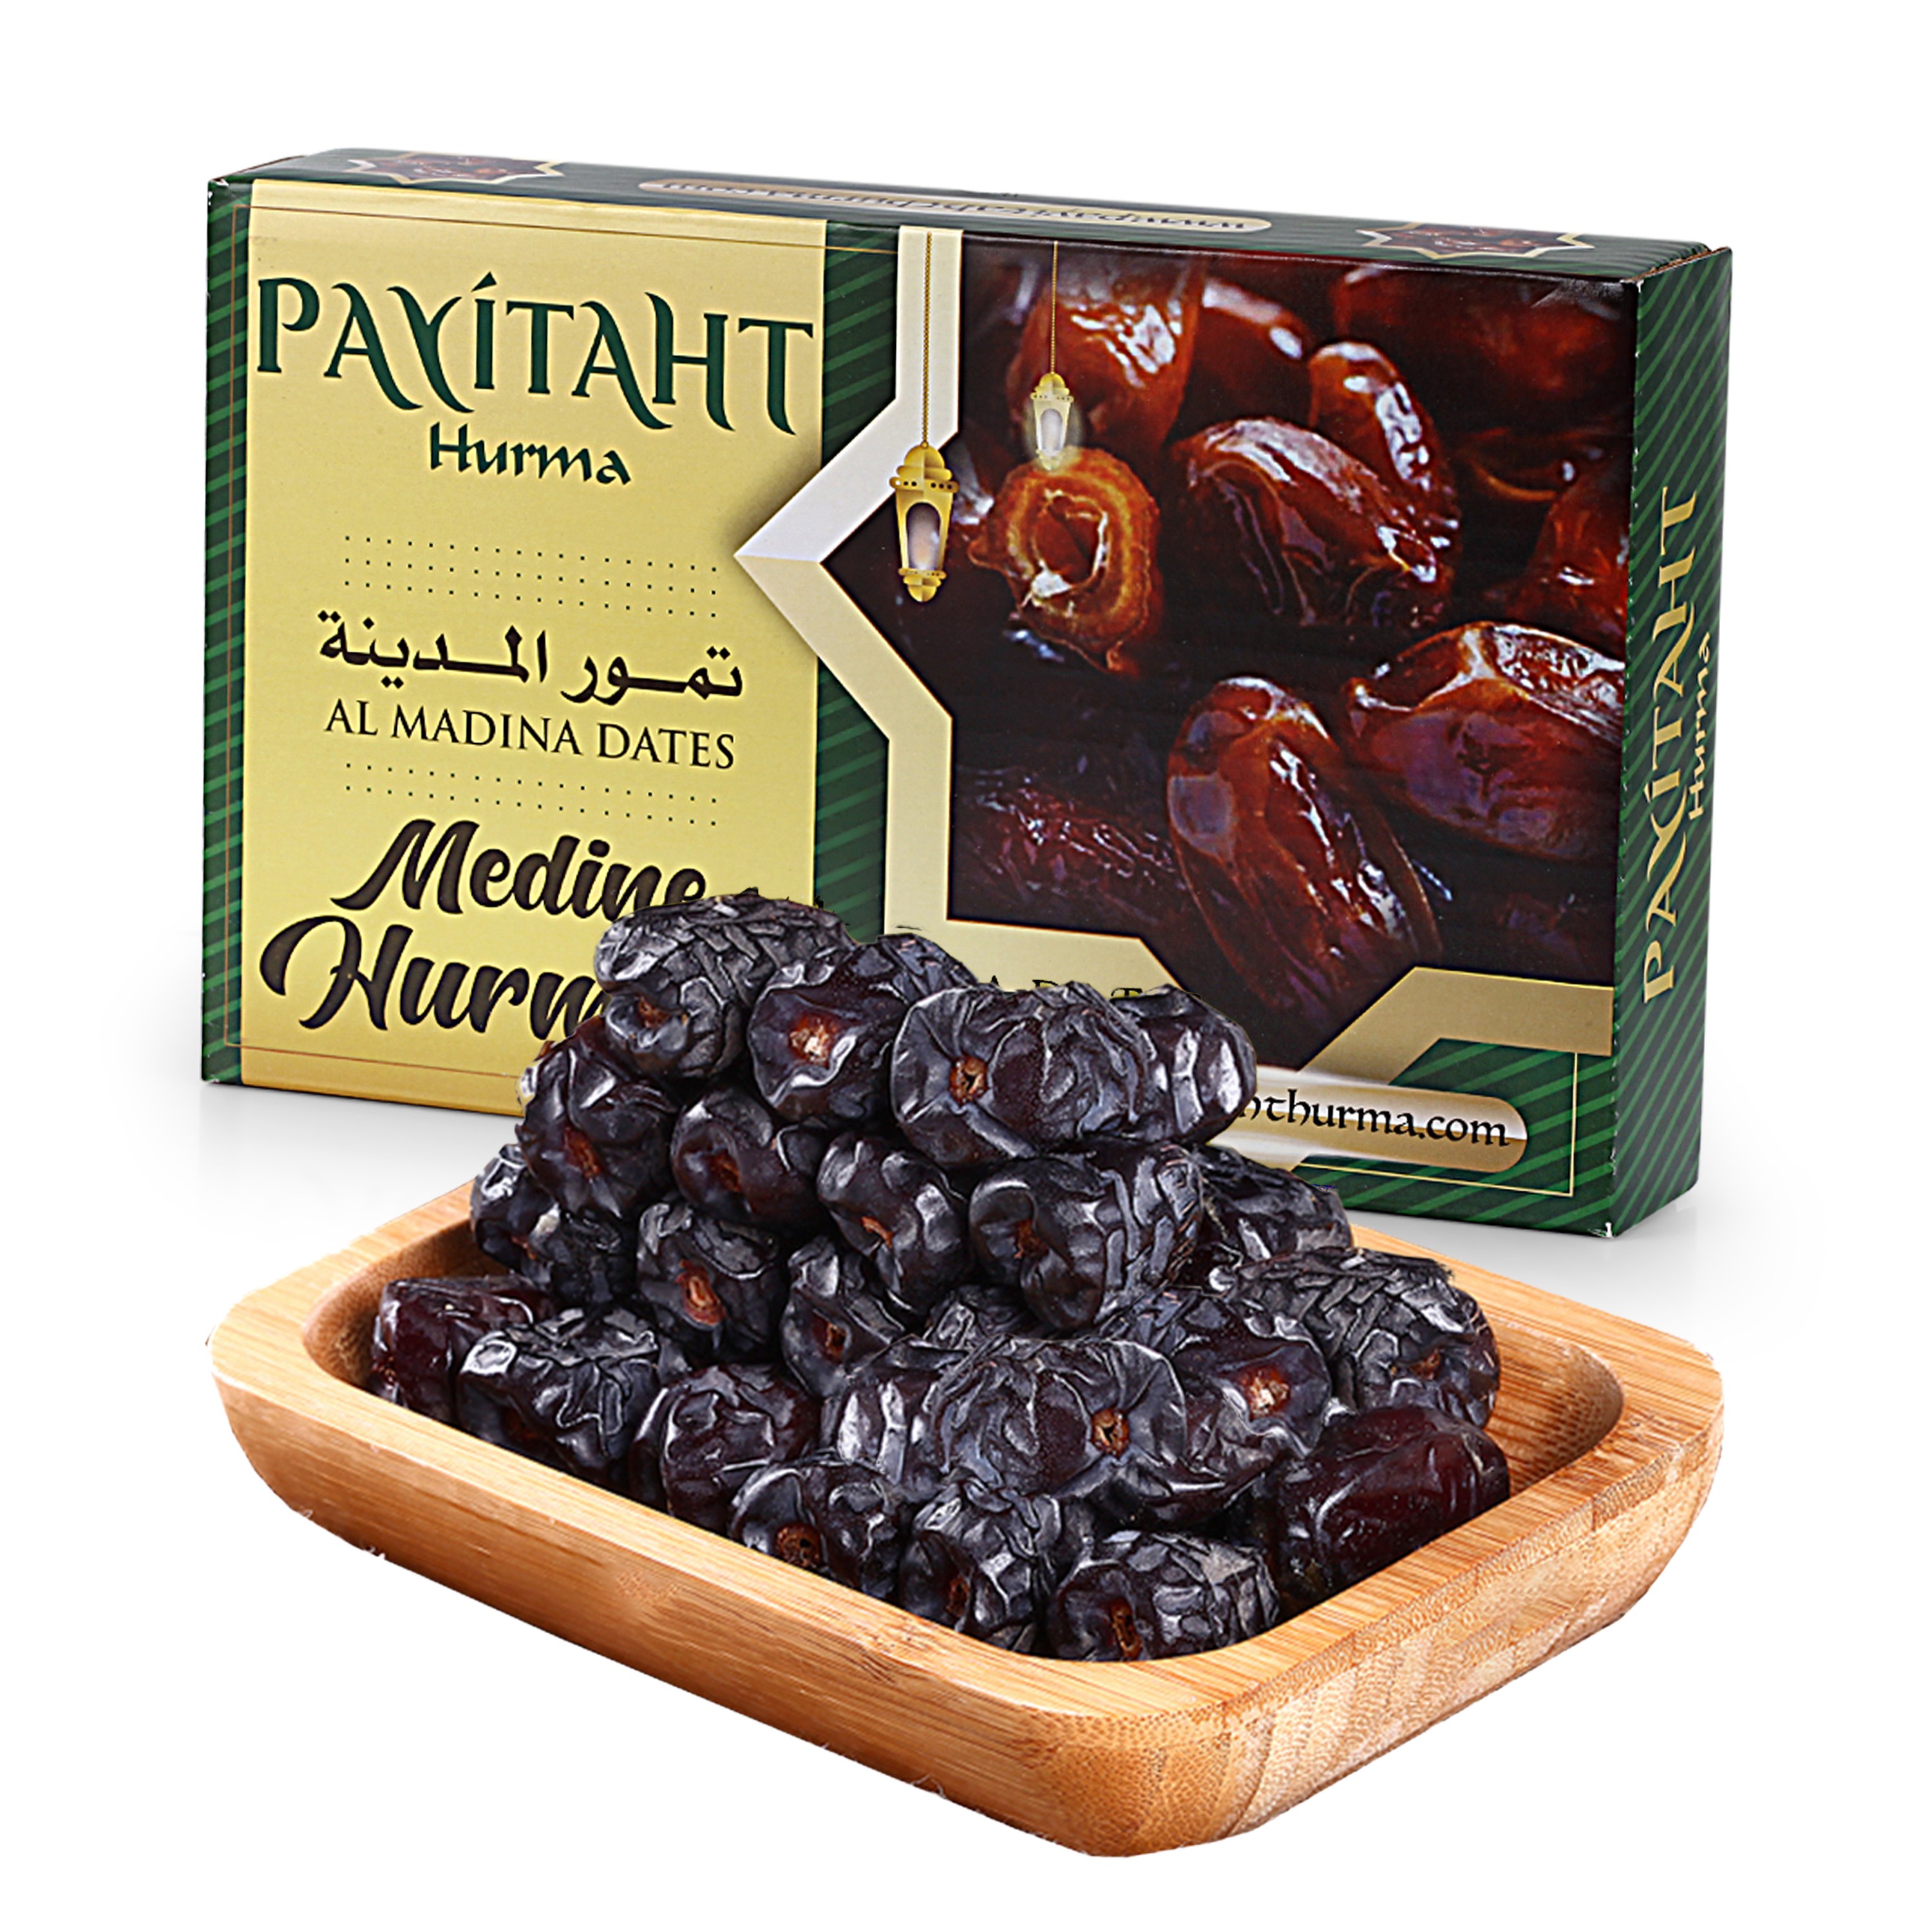 PAYİTAHT HURMA ACVE LUXURY MEDINA DATE NEW PRODUCT 1 KG PACKAGE